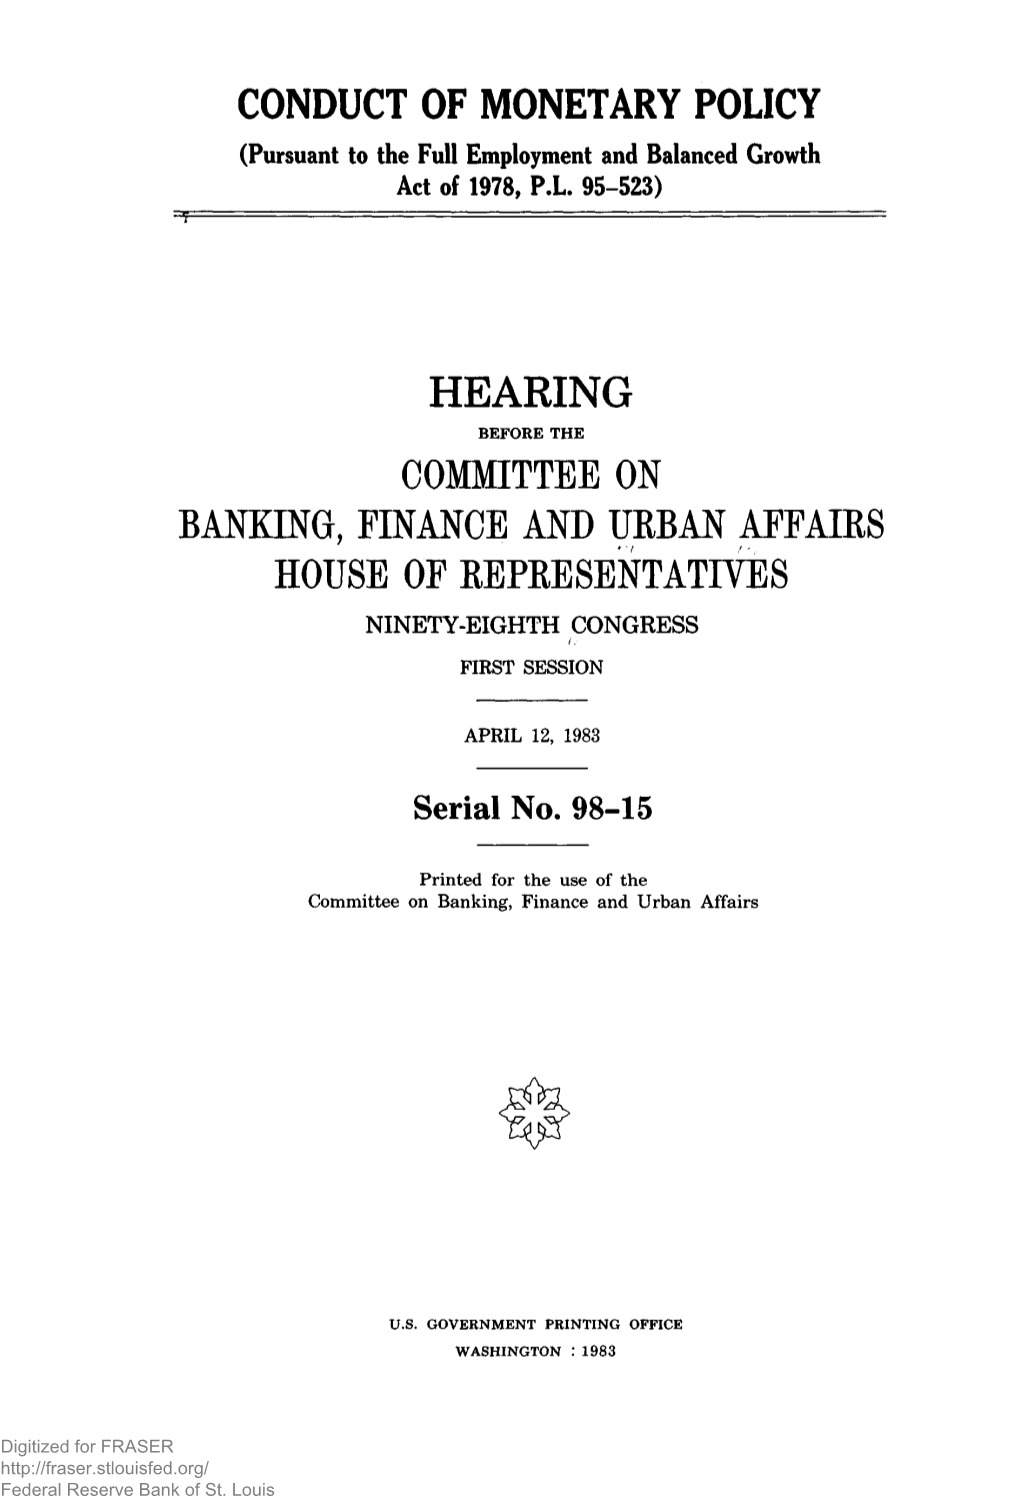 Conduct of Monetary Policy, Hearing Before the Committee on Banking